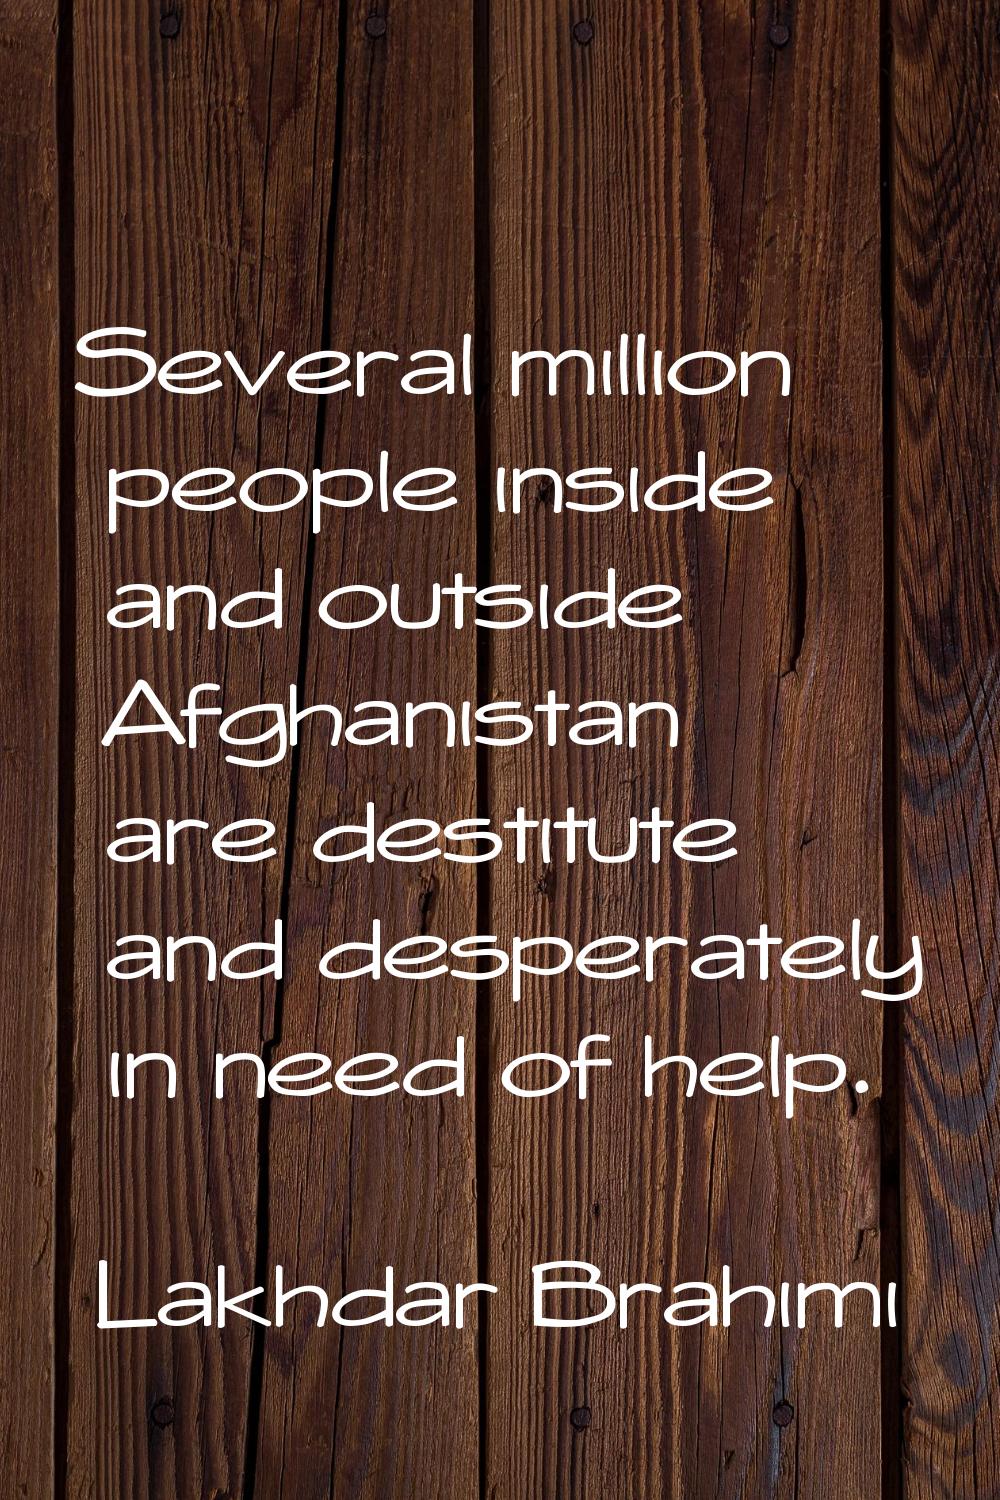 Several million people inside and outside Afghanistan are destitute and desperately in need of help